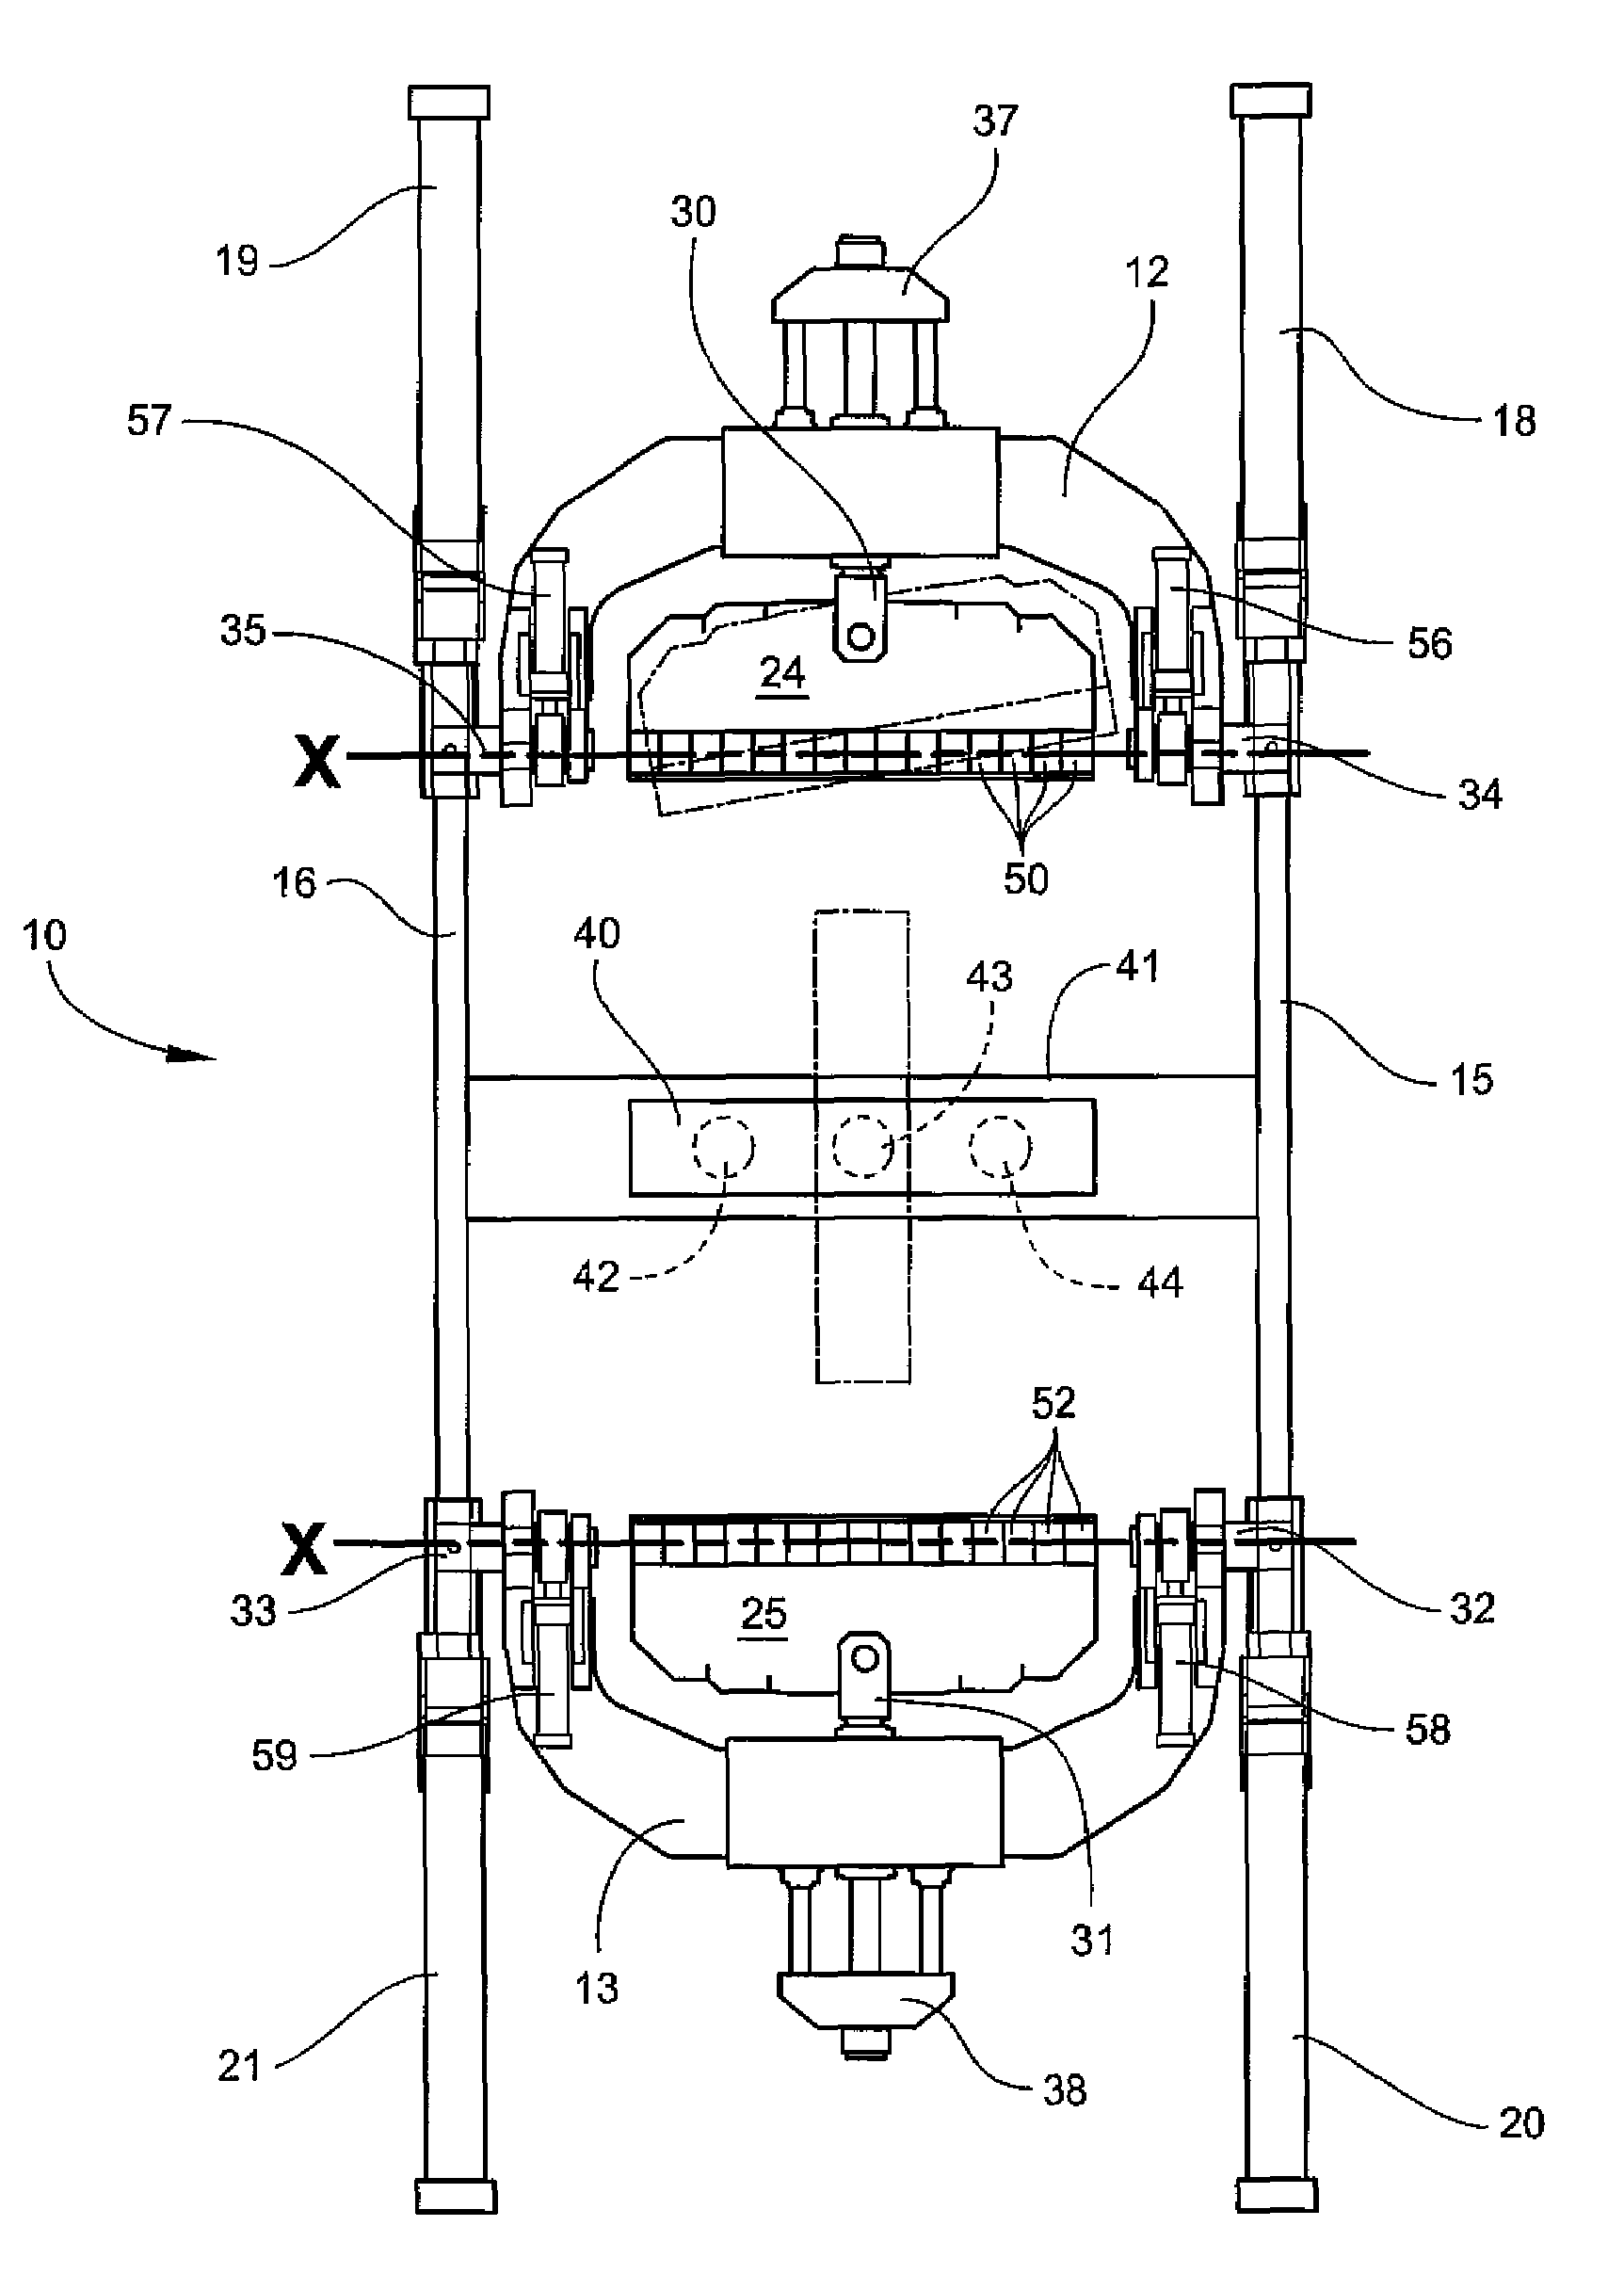 Stretch-forming machine and method